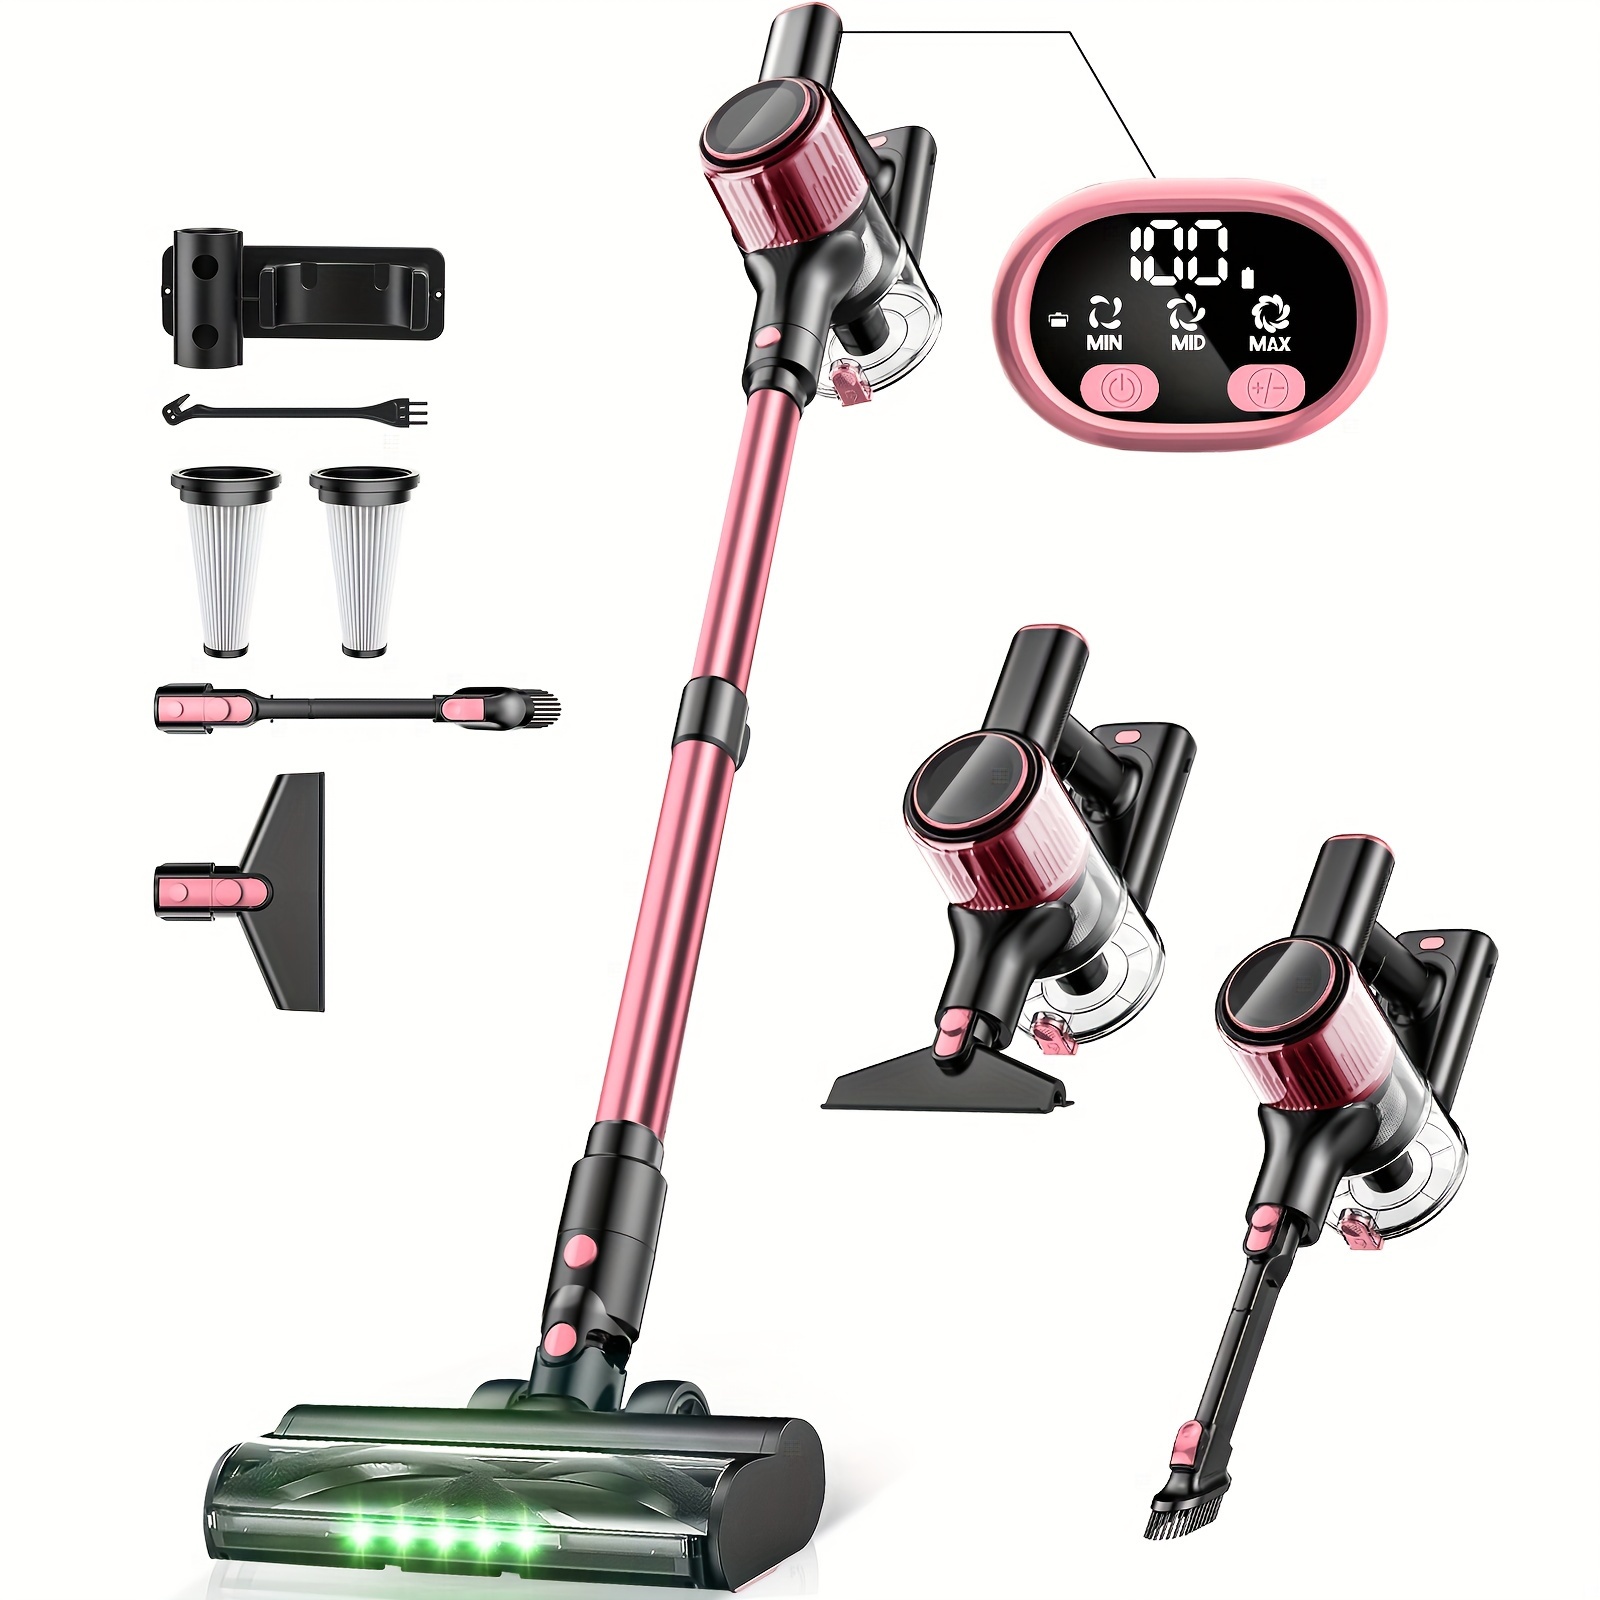 

Cordless Vacuum Cleaner, Powerful Suction 8 In 1 Stick Vacuum With Led Display, Lightweight & Ultra-quiet Stick Vacuum Cleaner For Carpet And Floor, Home, Pet Hair Cleaning